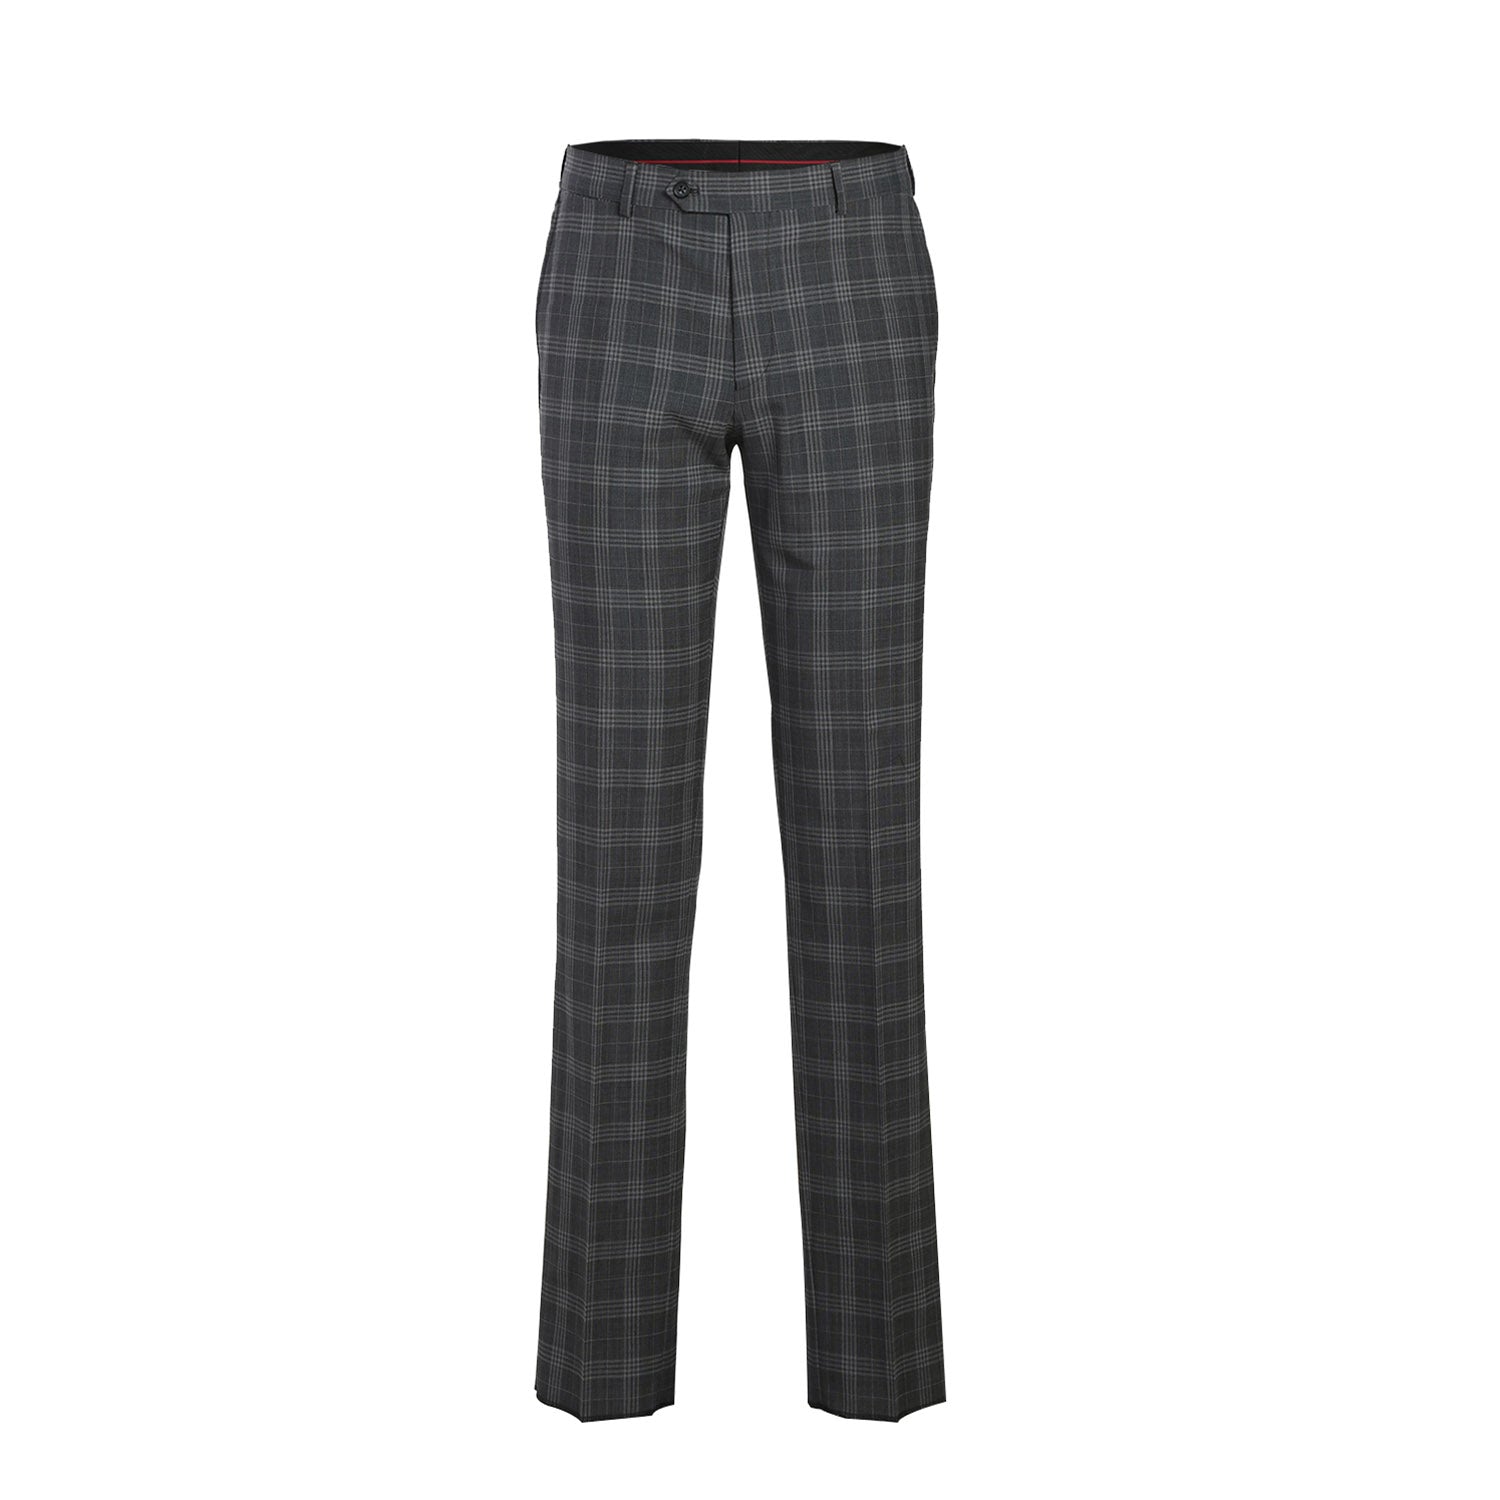 Wool Stretch Double Breasted SLIM FIT Suit in Grey Check (Short, Regular,  and Long Available) by English Laundry